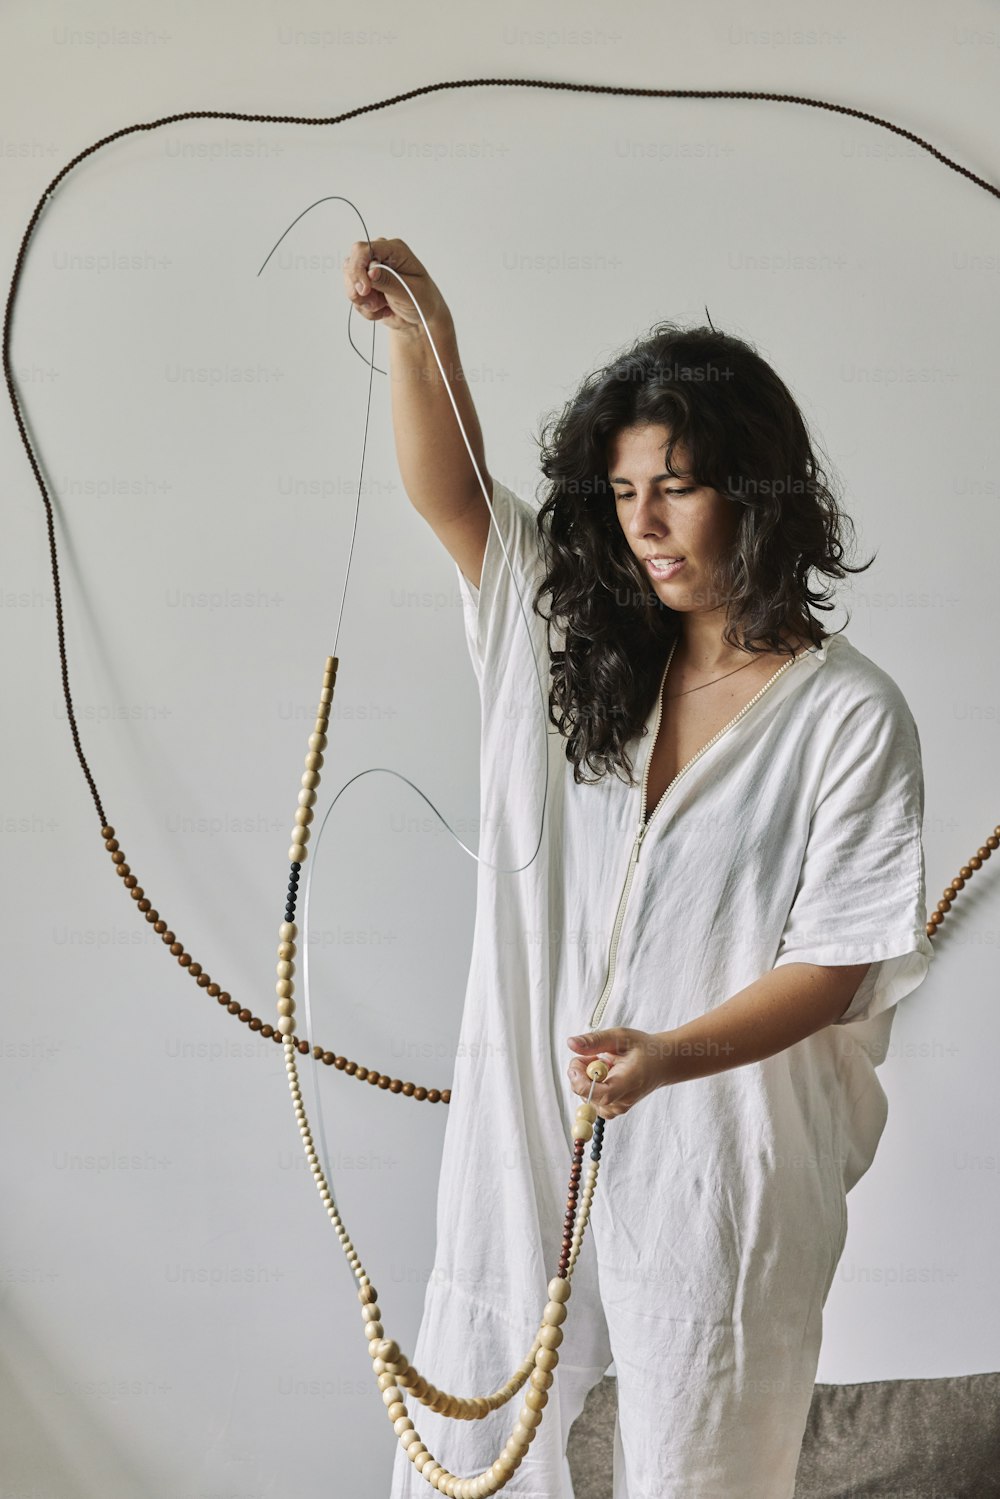 a woman holding a string and a string of beads